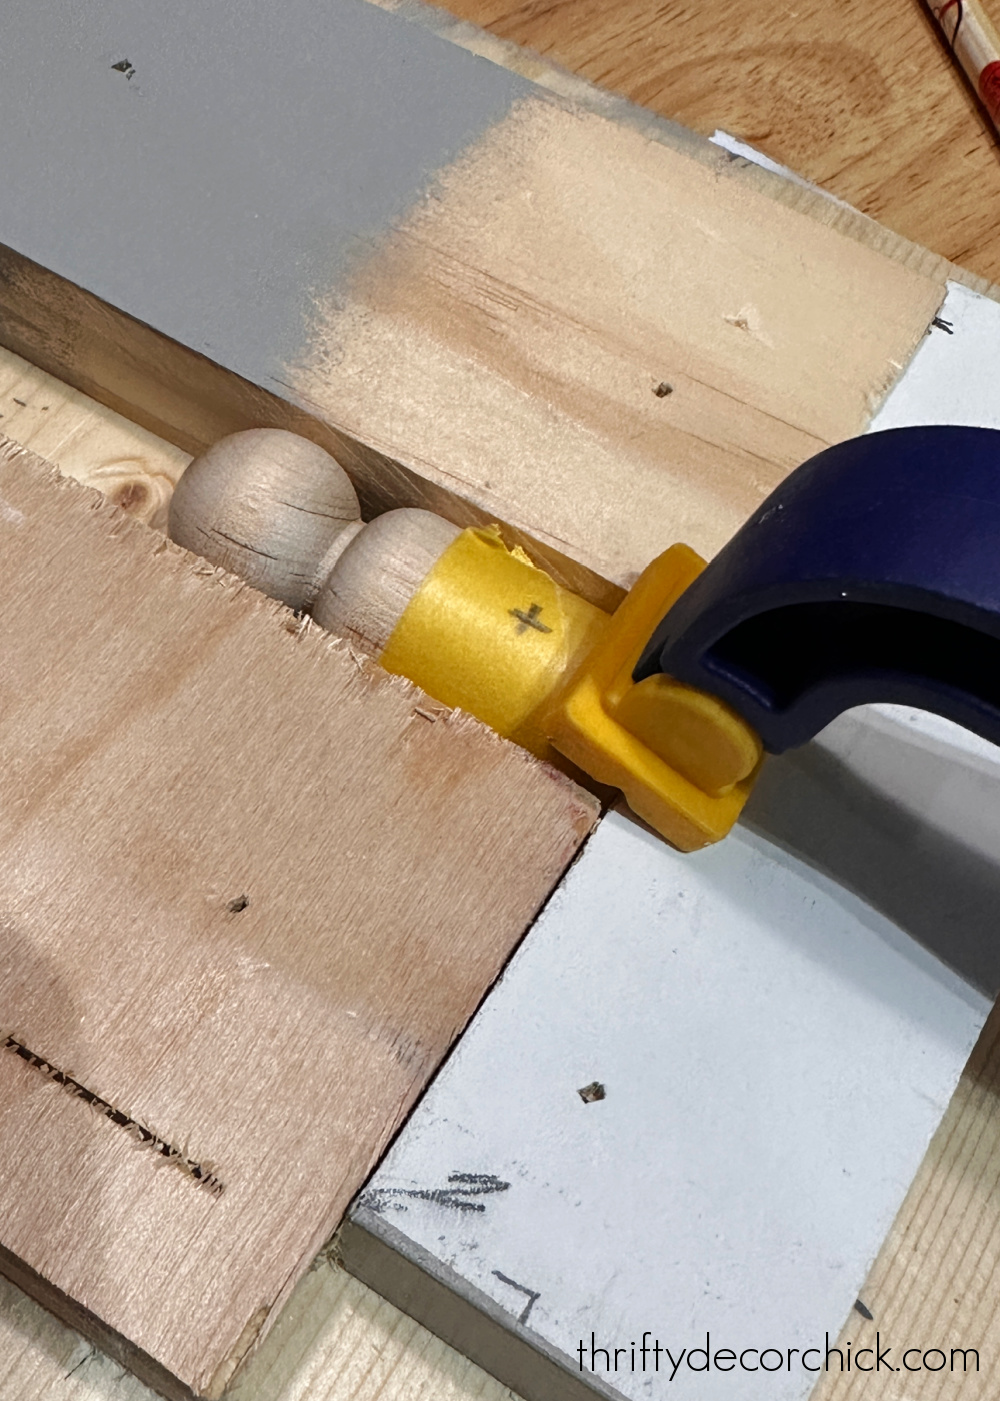 drilling holes in small wood pieces